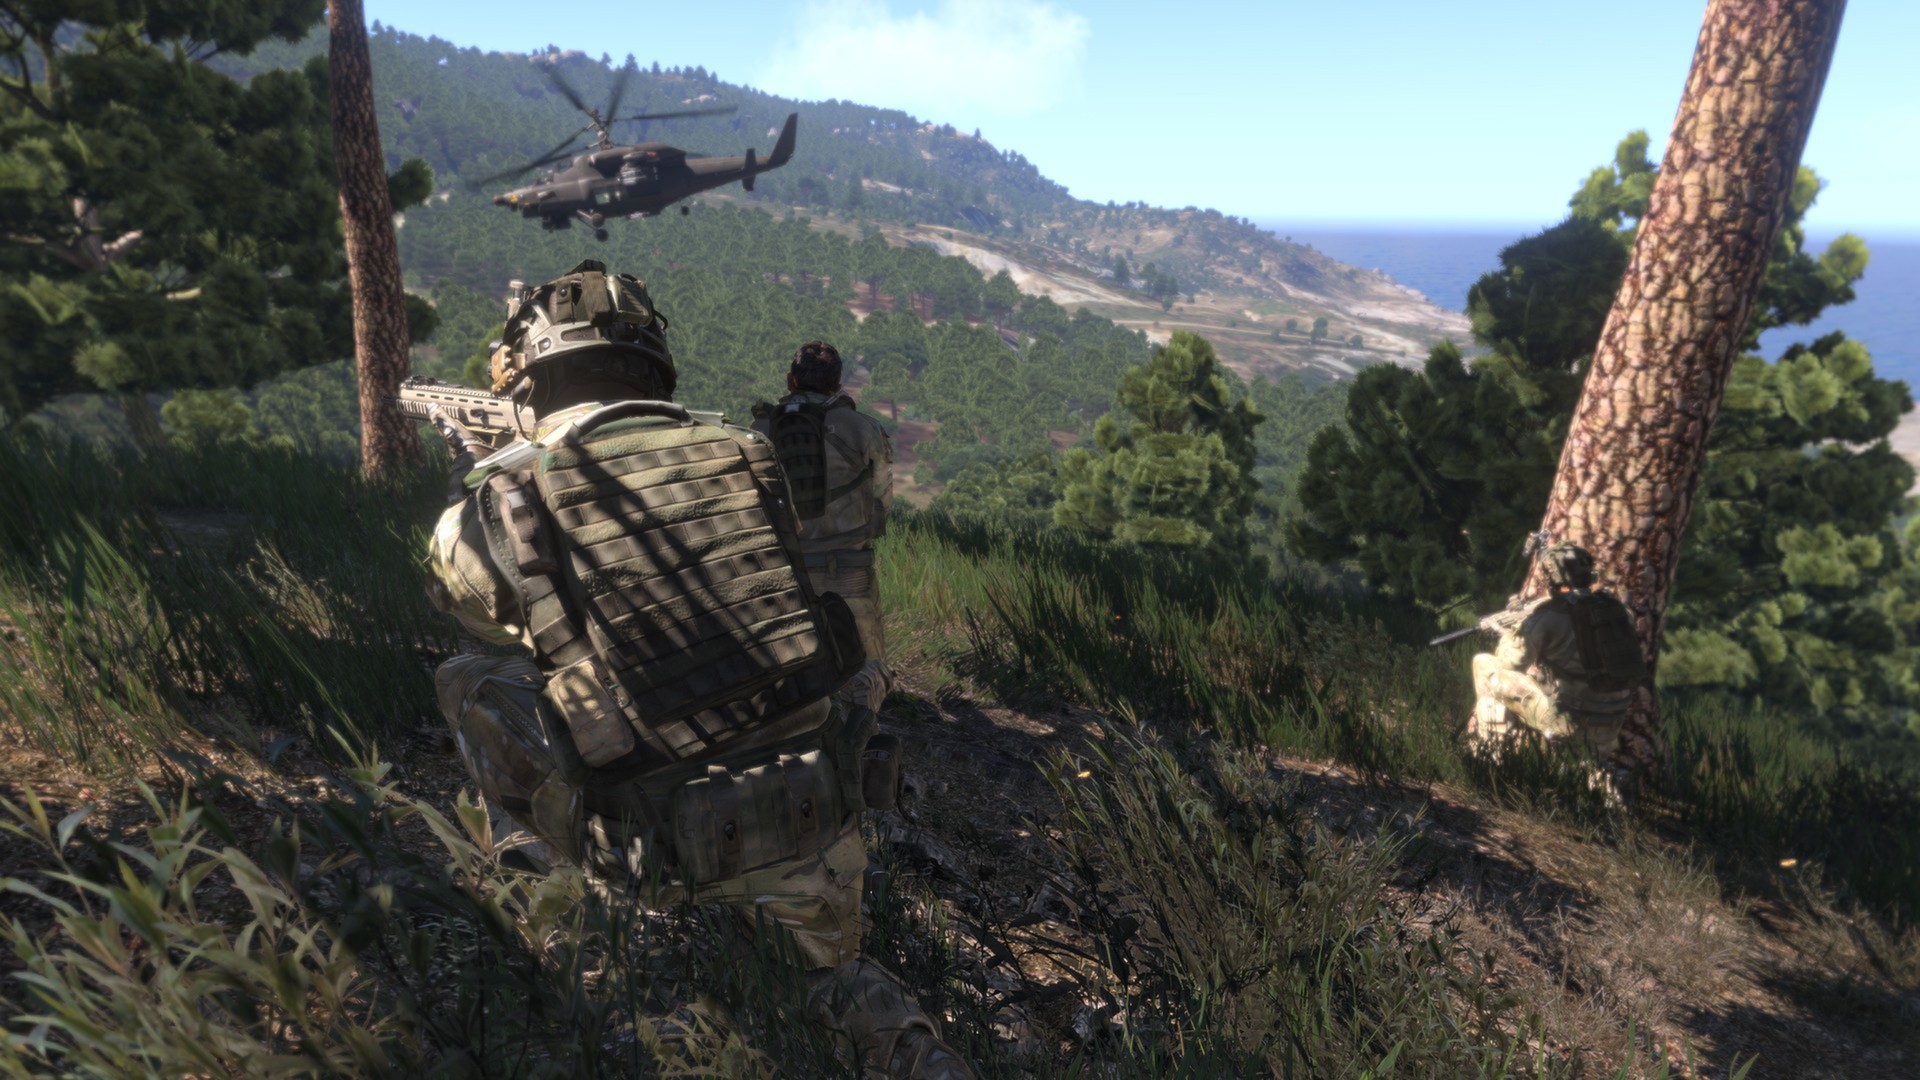 Download Arma 3 wallpapers for mobile phone, free Arma 3 HD pictures